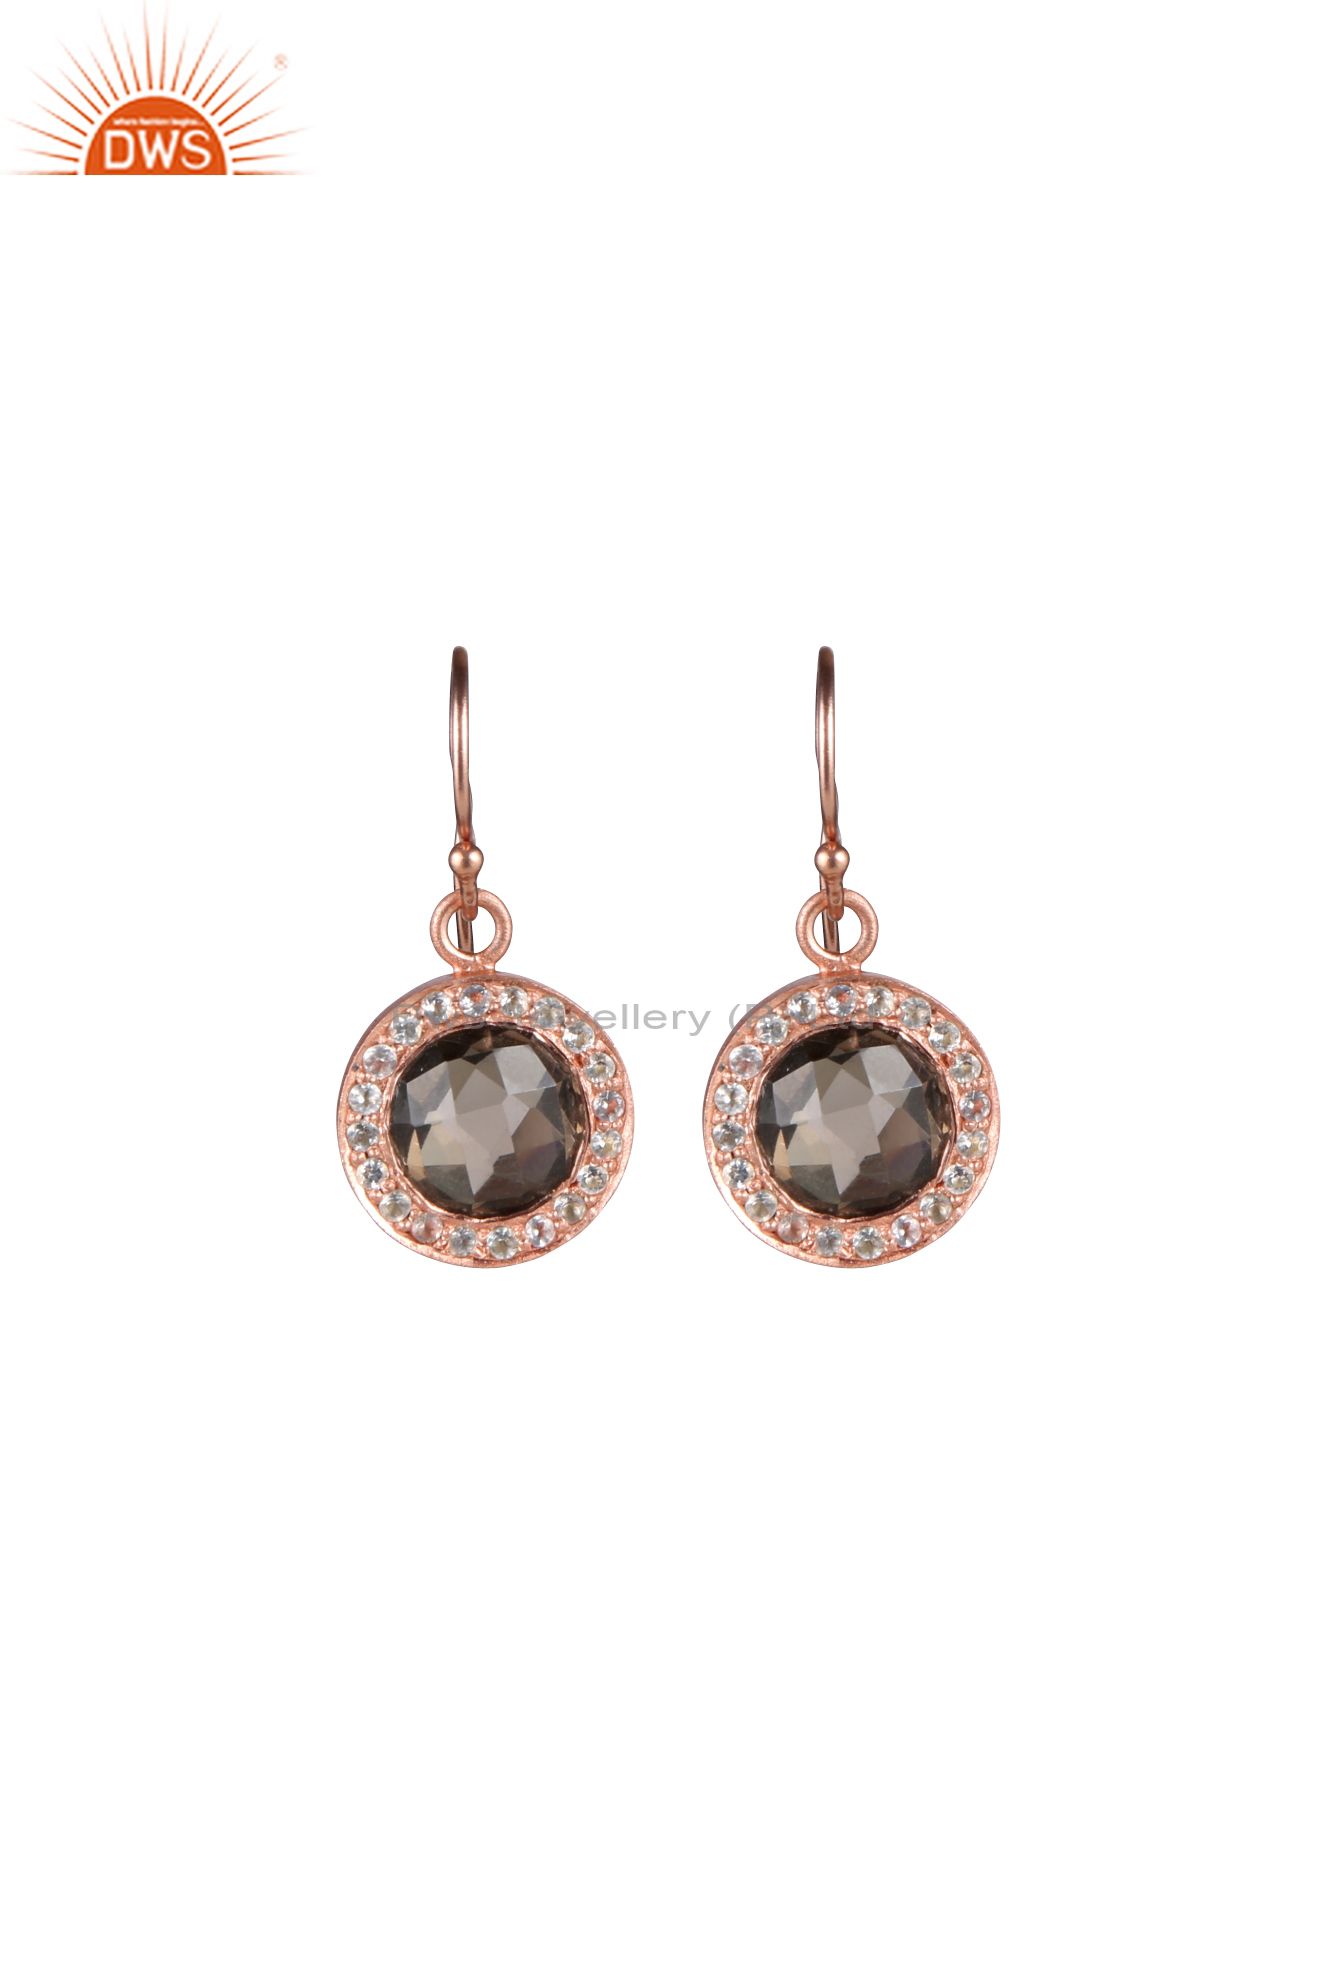 18K Rose Gold Plated Sterling Silver Smoky Quartz And White Topaz Halo Earrings